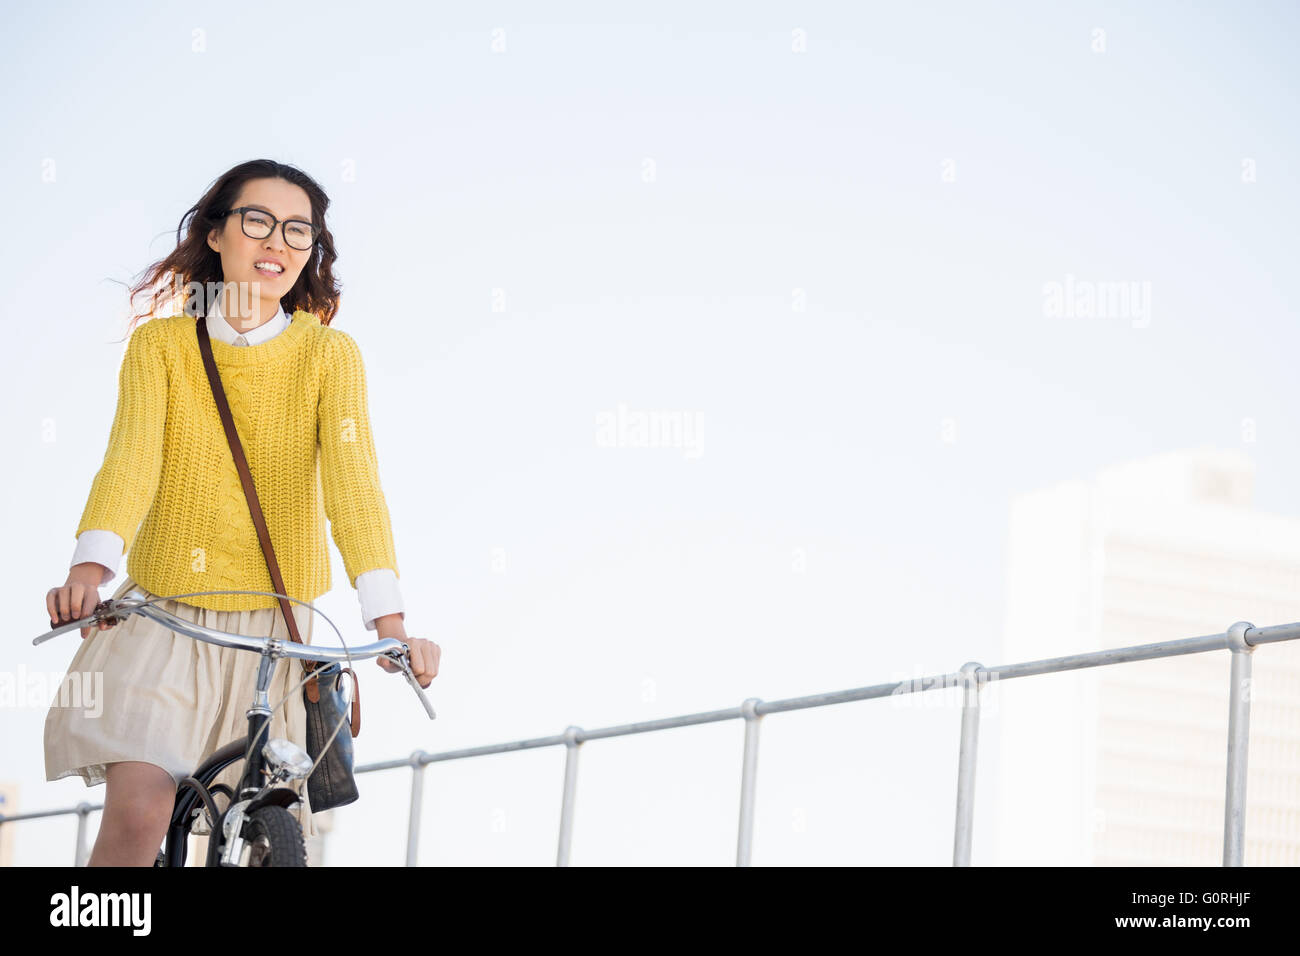 Hipster riding a bike Stock Photo